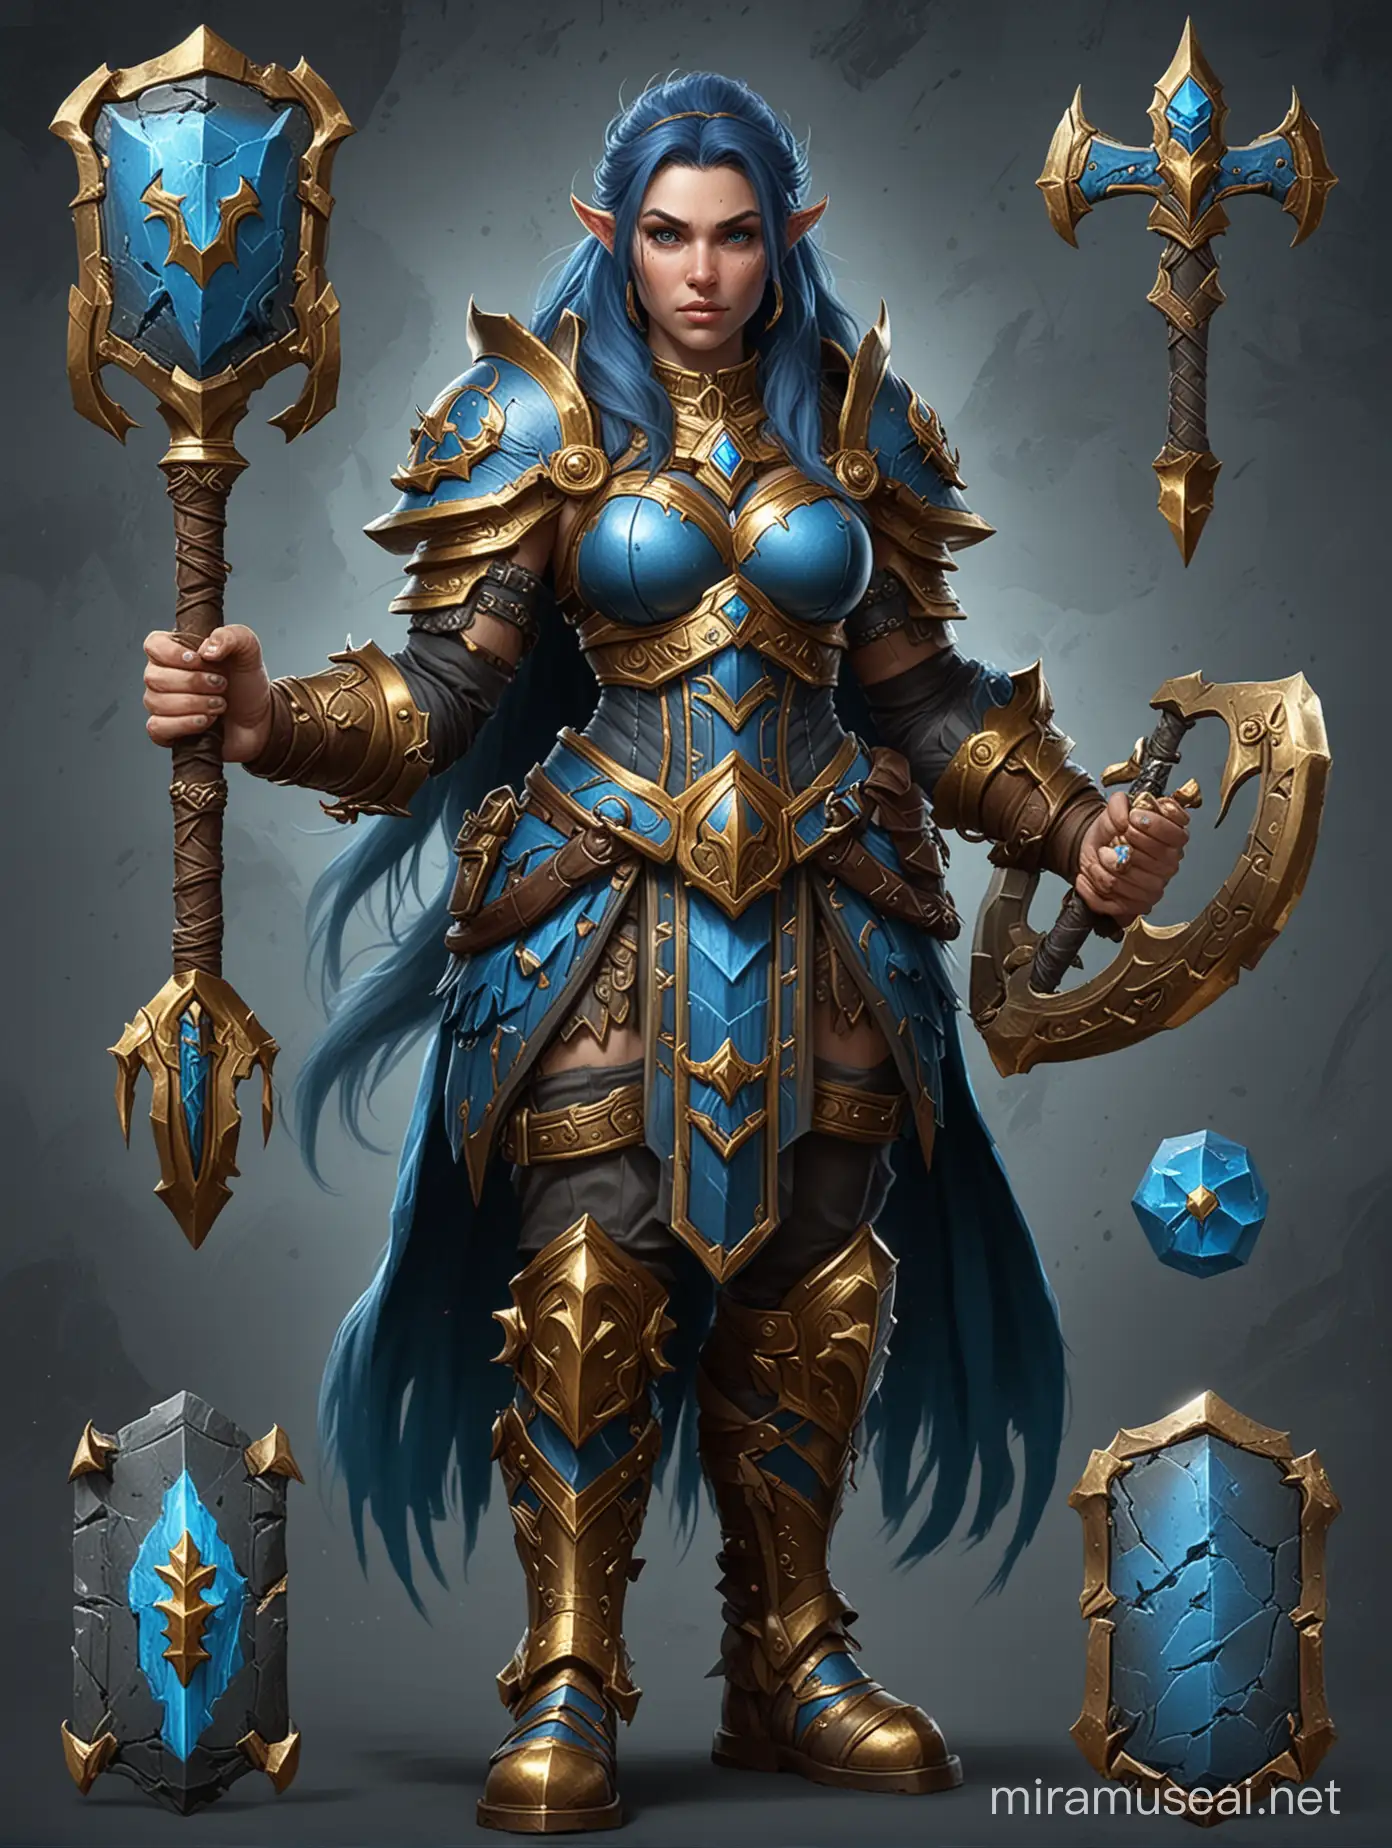 Blue Dwarf Warrior Female Character Card Variations on Dark Stone Surface